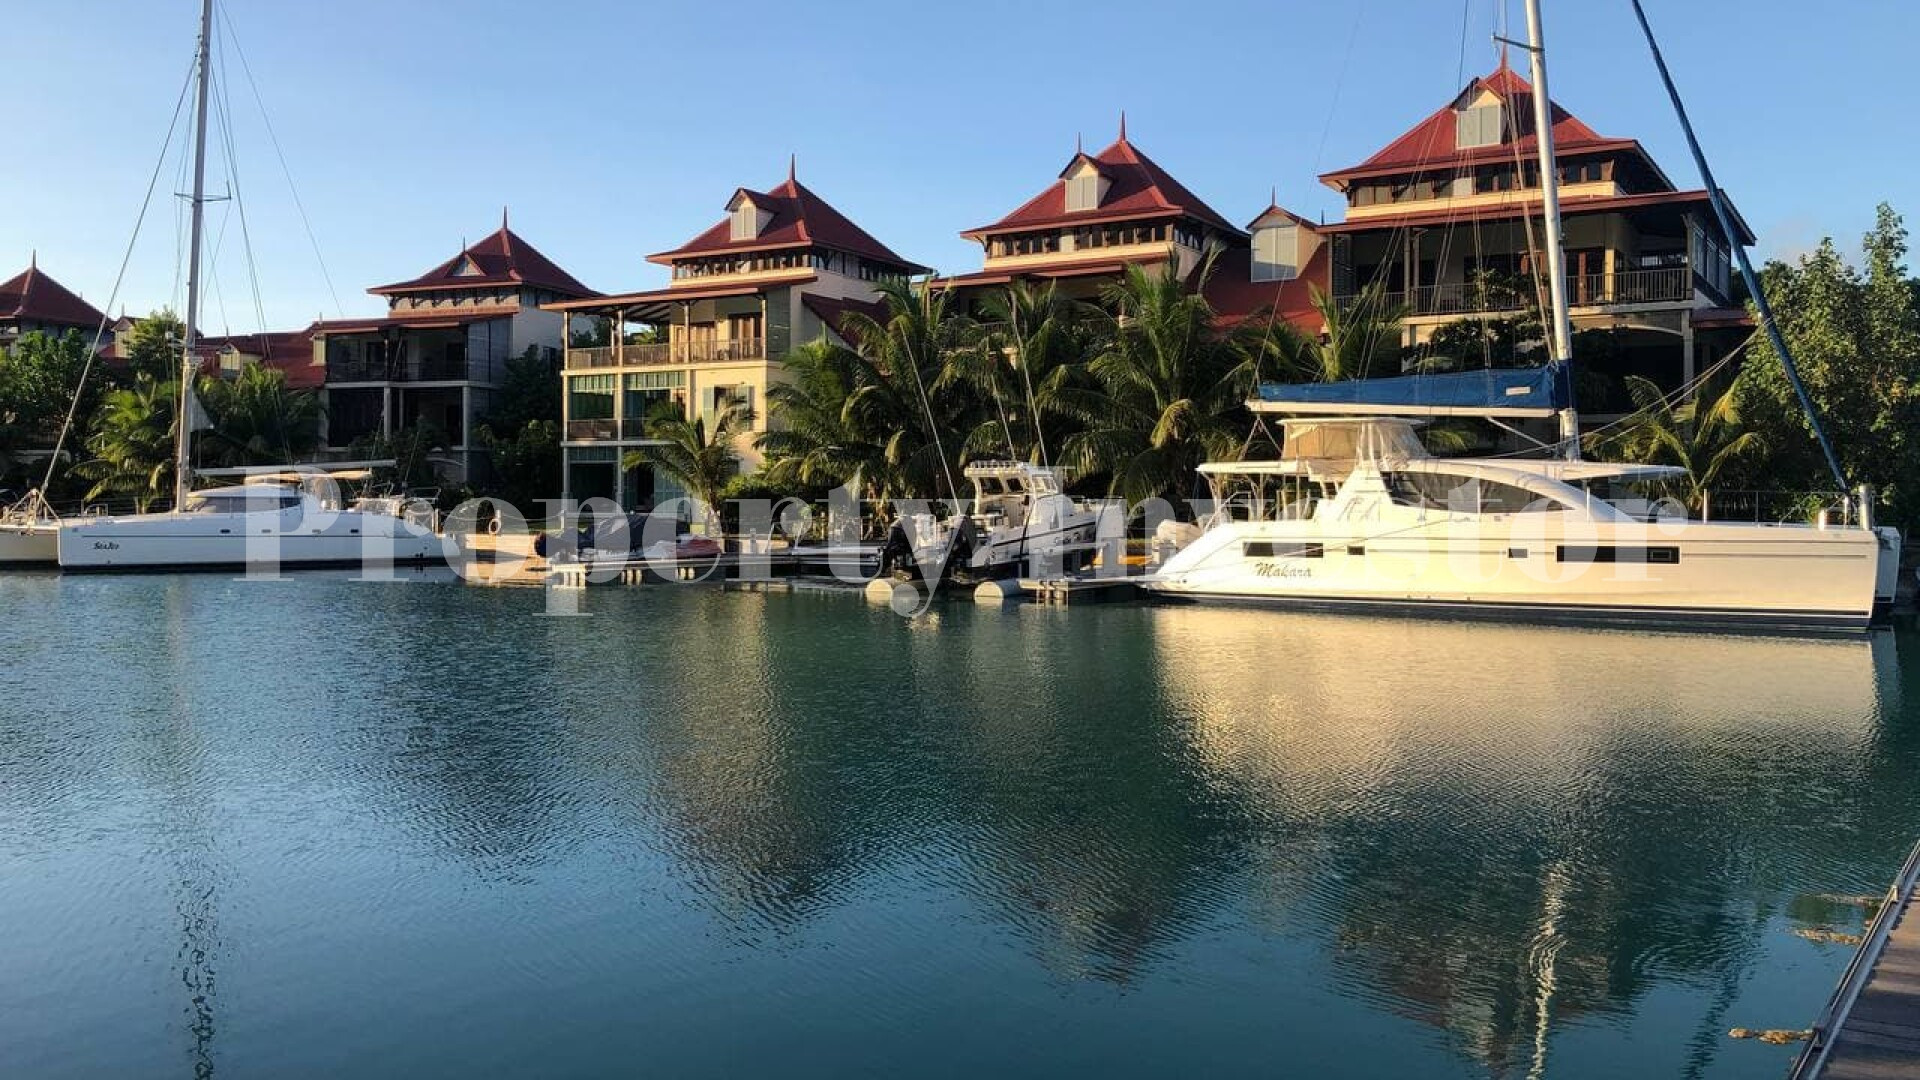 Spacious 2 Bedroom Ground Floor Apartment with Private Mooring for Sale on Eden Island, Seychelles